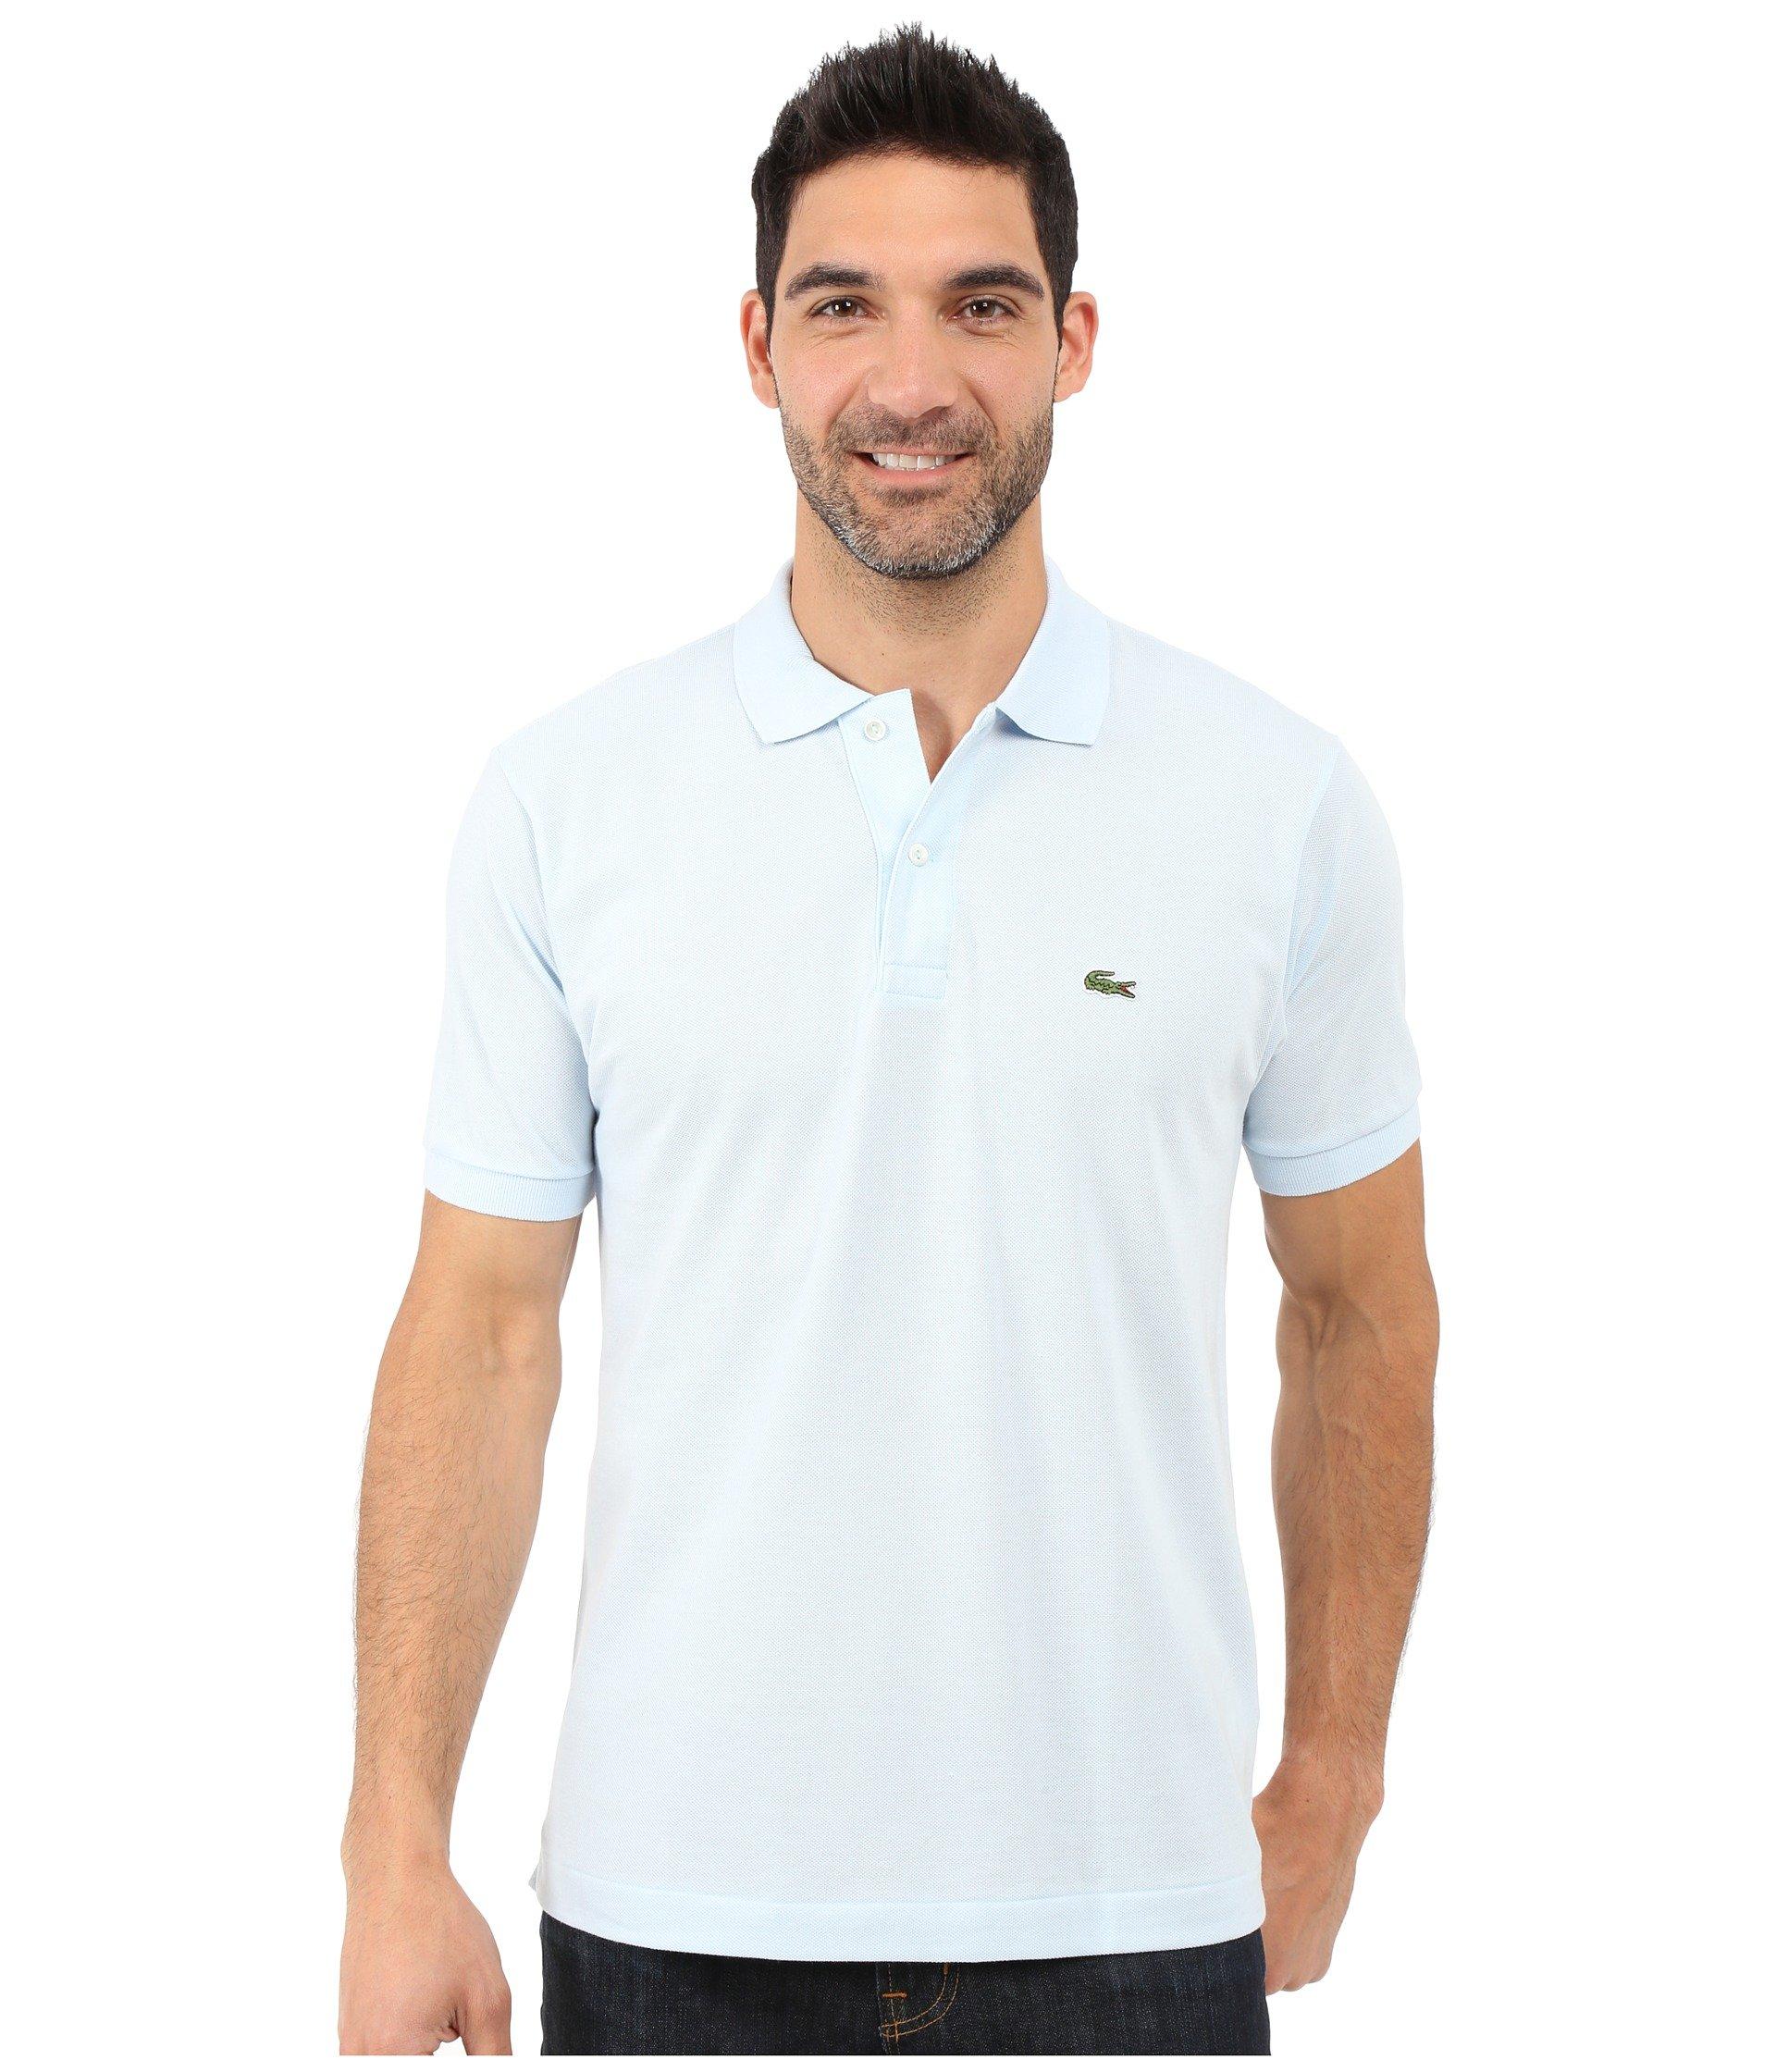 Lacoste L1212 Classic Pique Polo Shirt in Blue for Men - Lyst